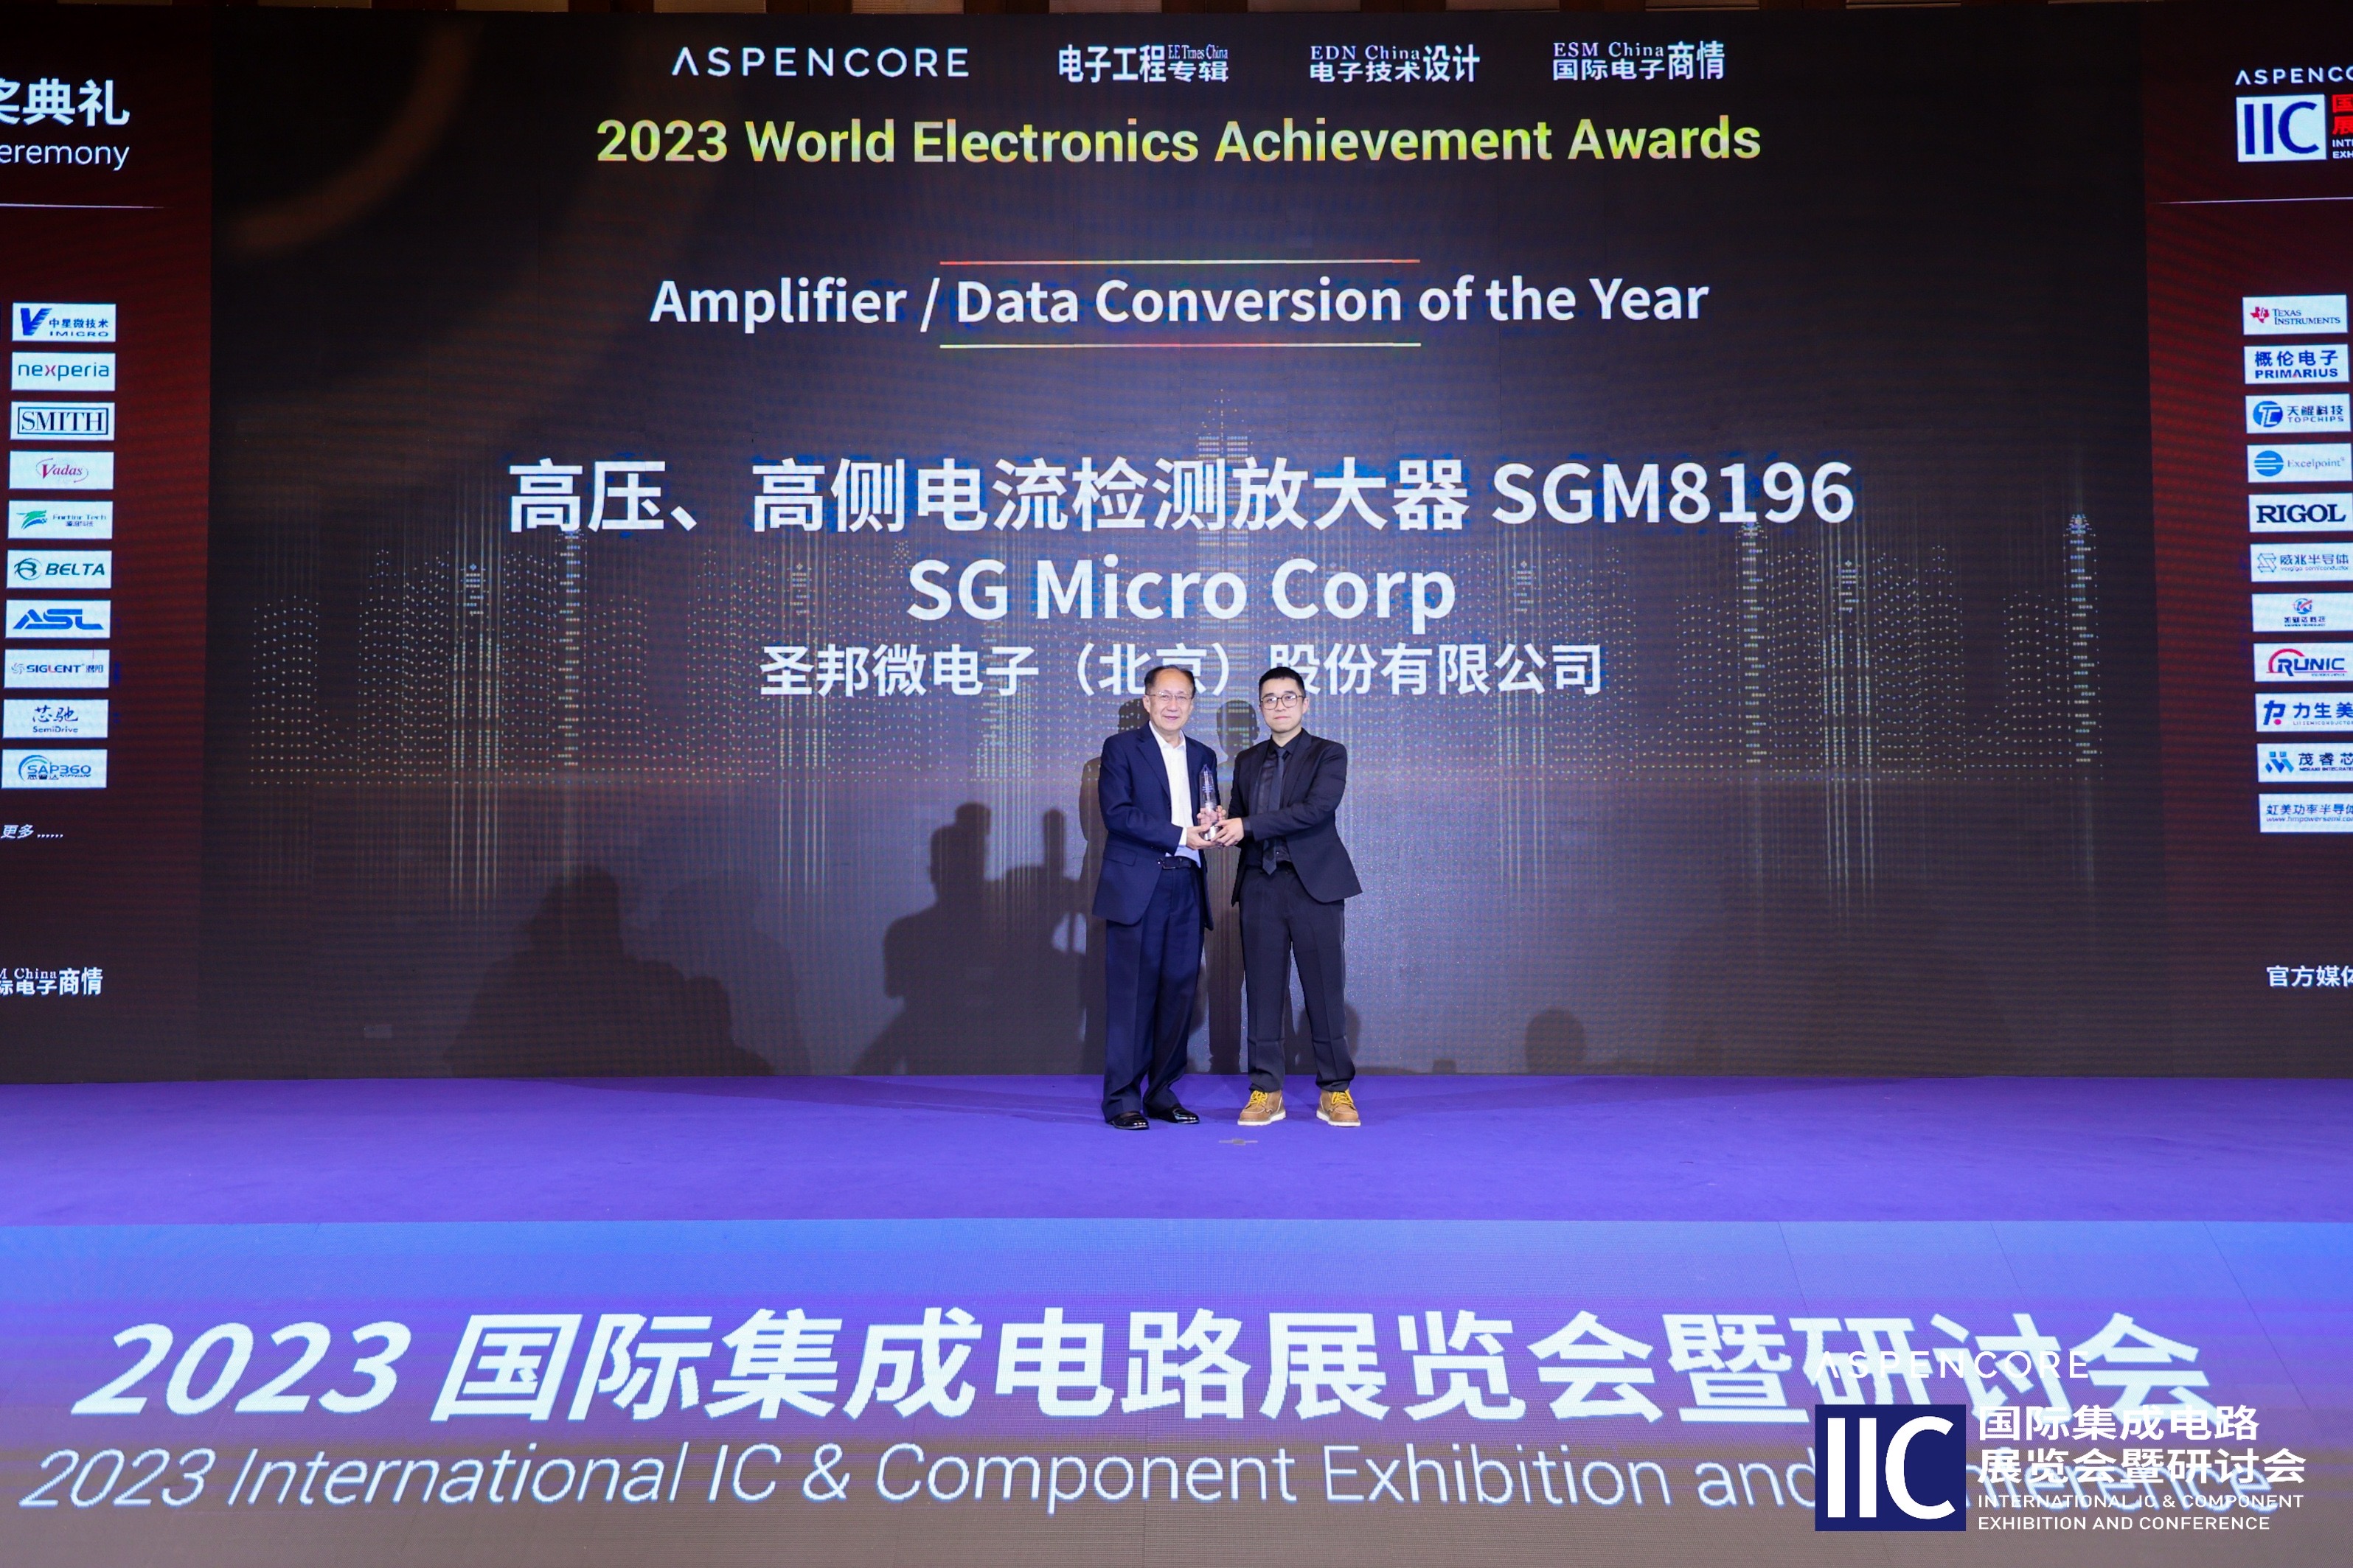 SGM8196 won the "Amplifier / Data Conversion of the Year"